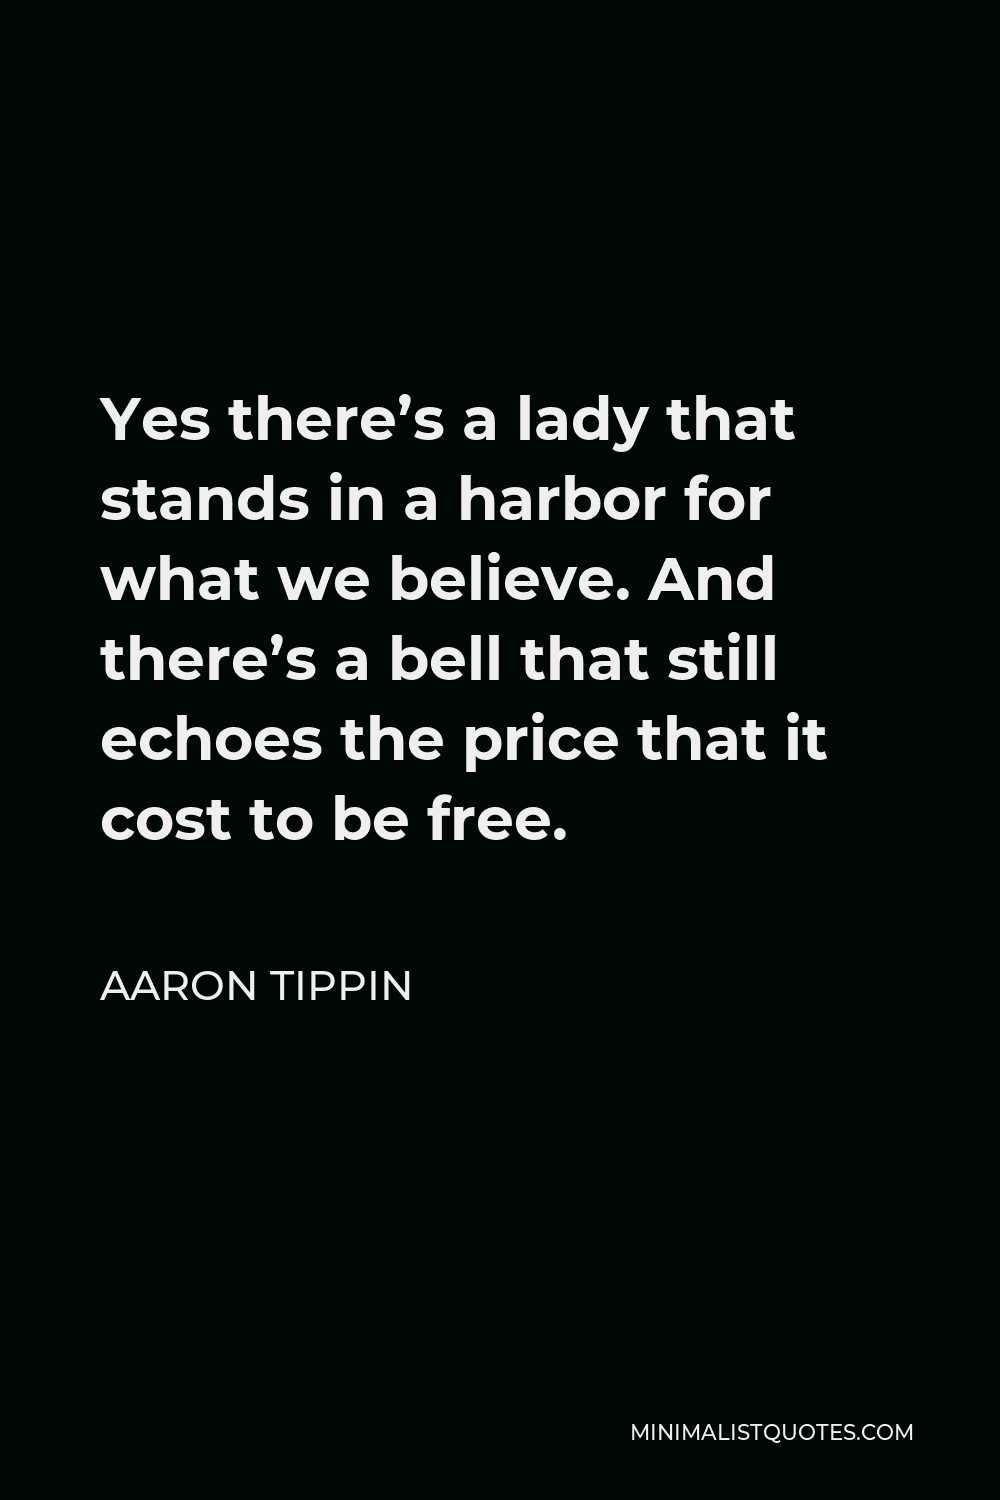 Aaron Tippin Quote - Yes there’s a lady that stands in a harbor for what we believe. And there’s a bell that still echoes the price that it cost to be free.